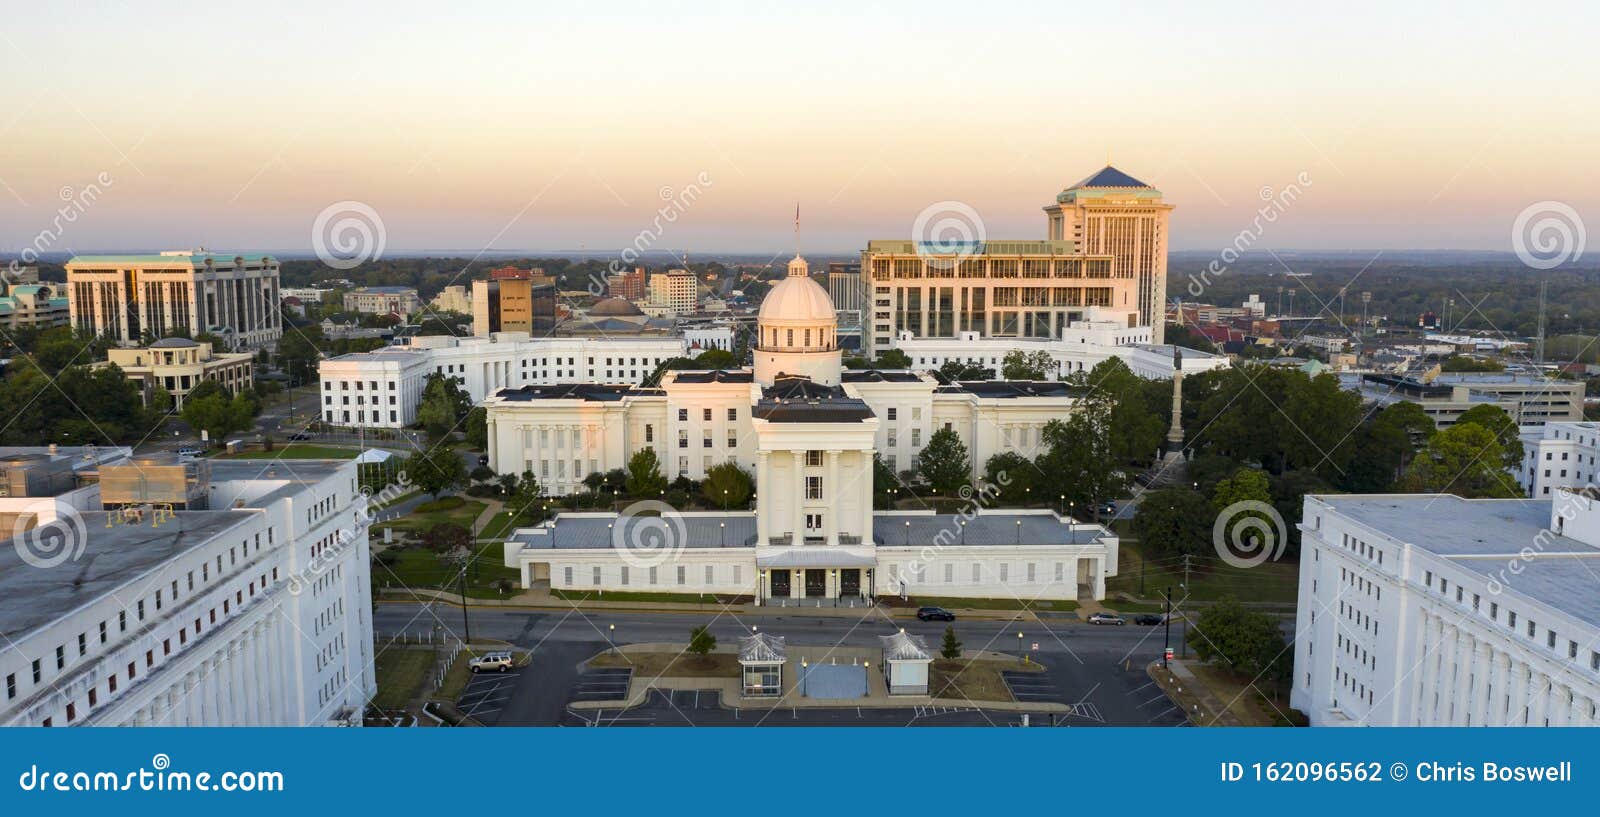 dexter avenue leads to the classic statehouse in downtown montgomery alabama